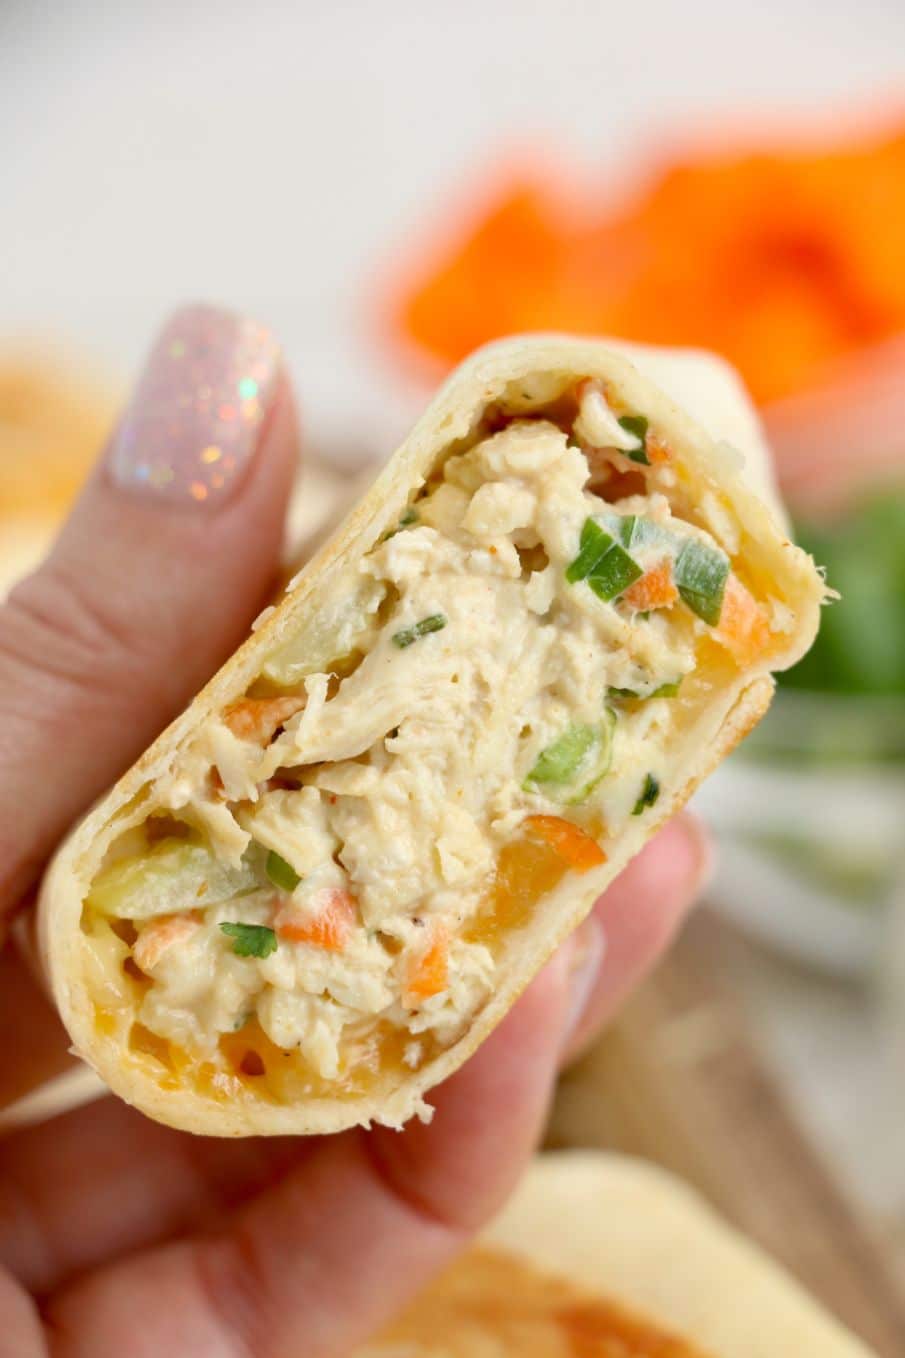 A chicken salad and cheese wrap cut in half and held by a hand